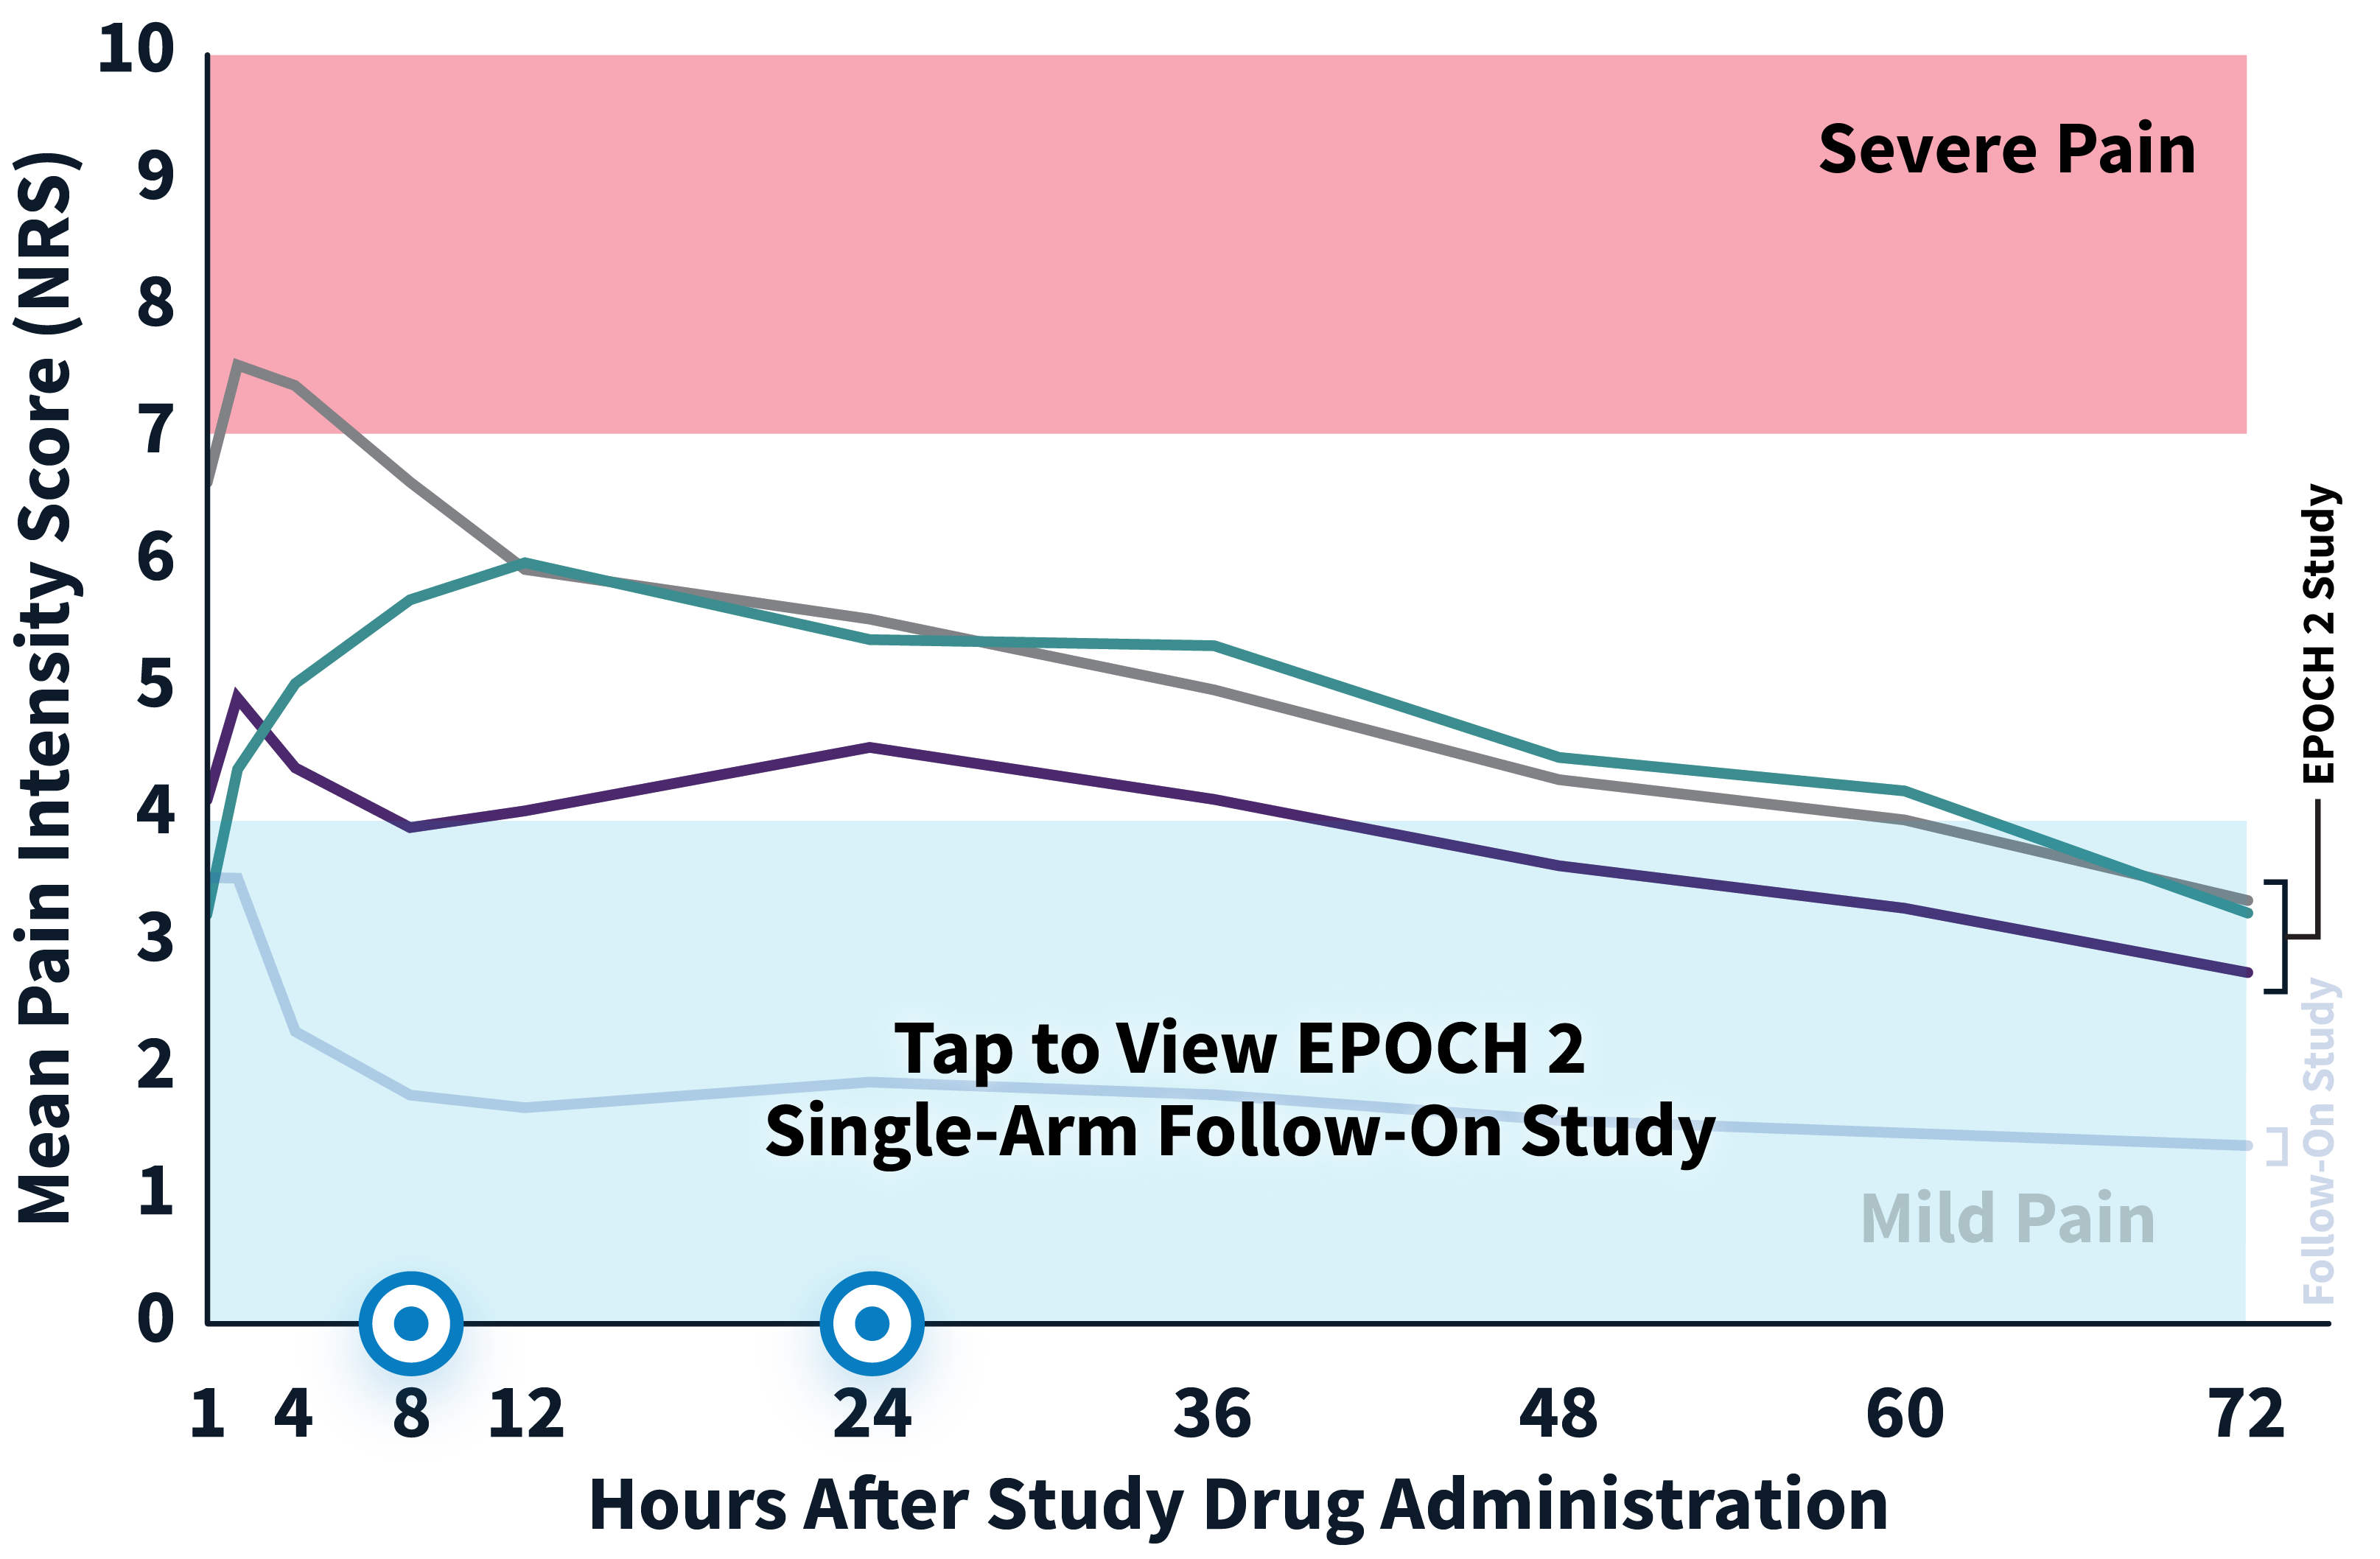 Graph: EPOCH 2 Herniorrhaphy: 72 hours of pain relief.